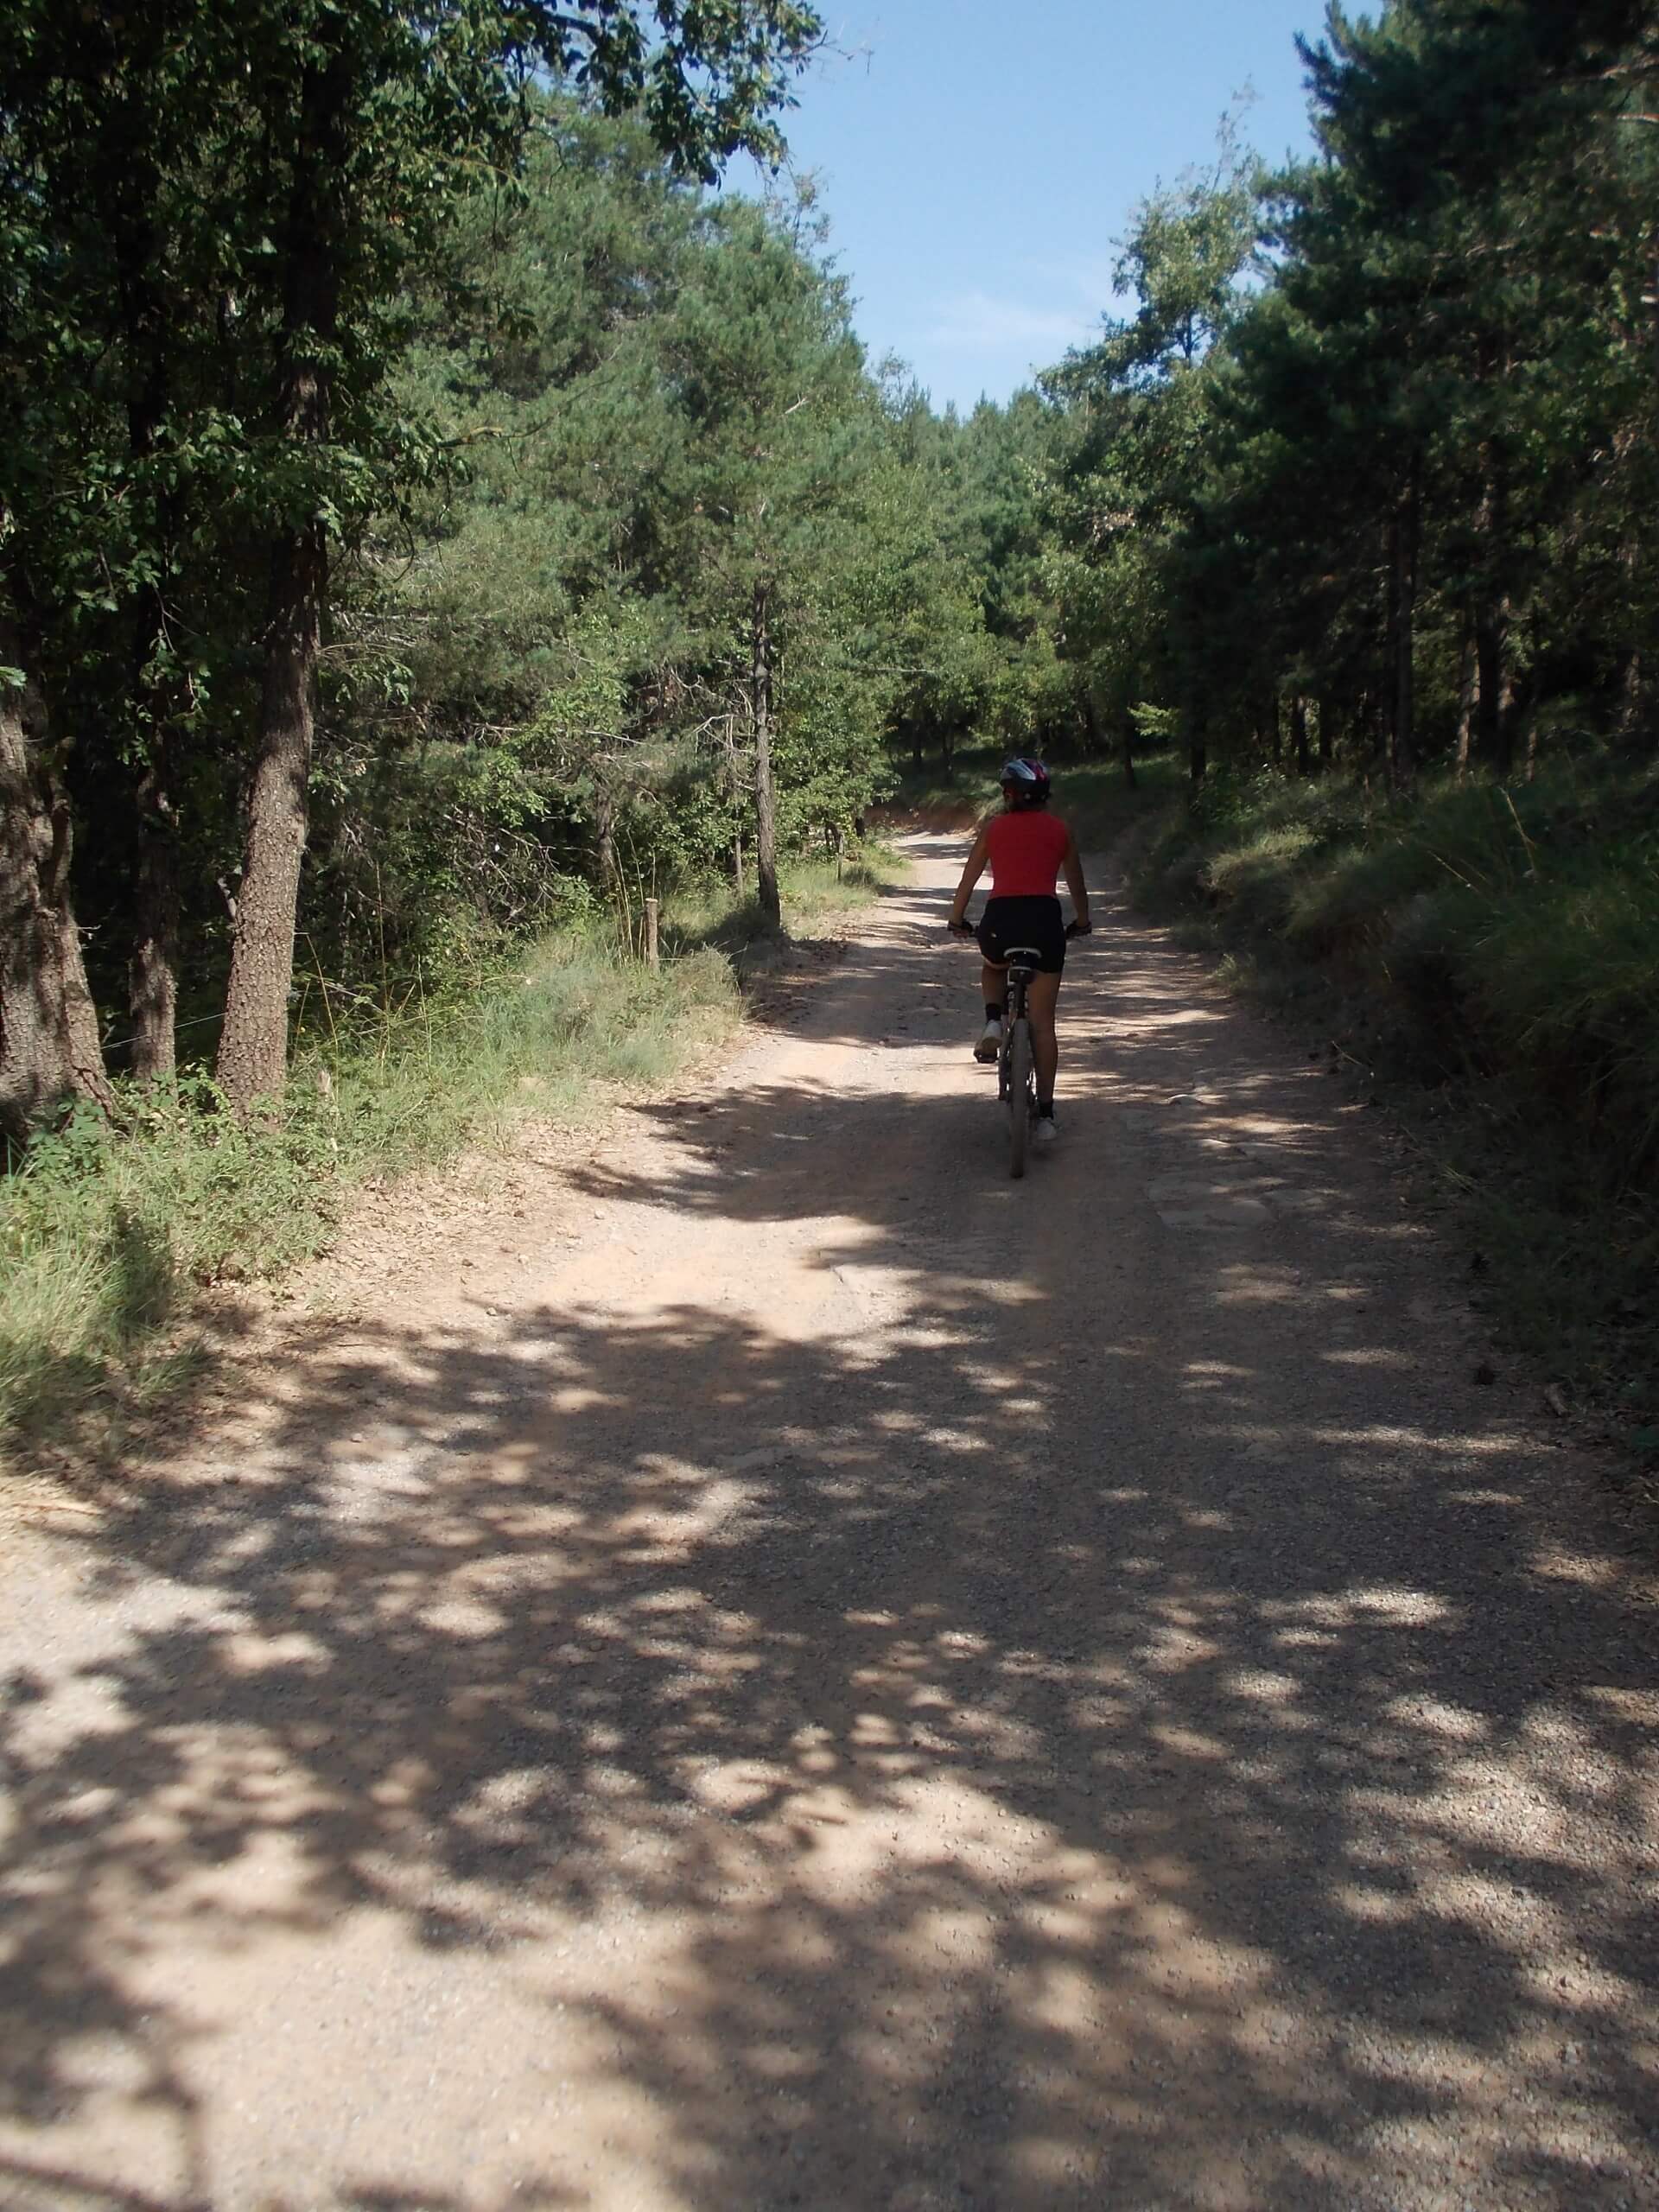 Cycling in Catalonia